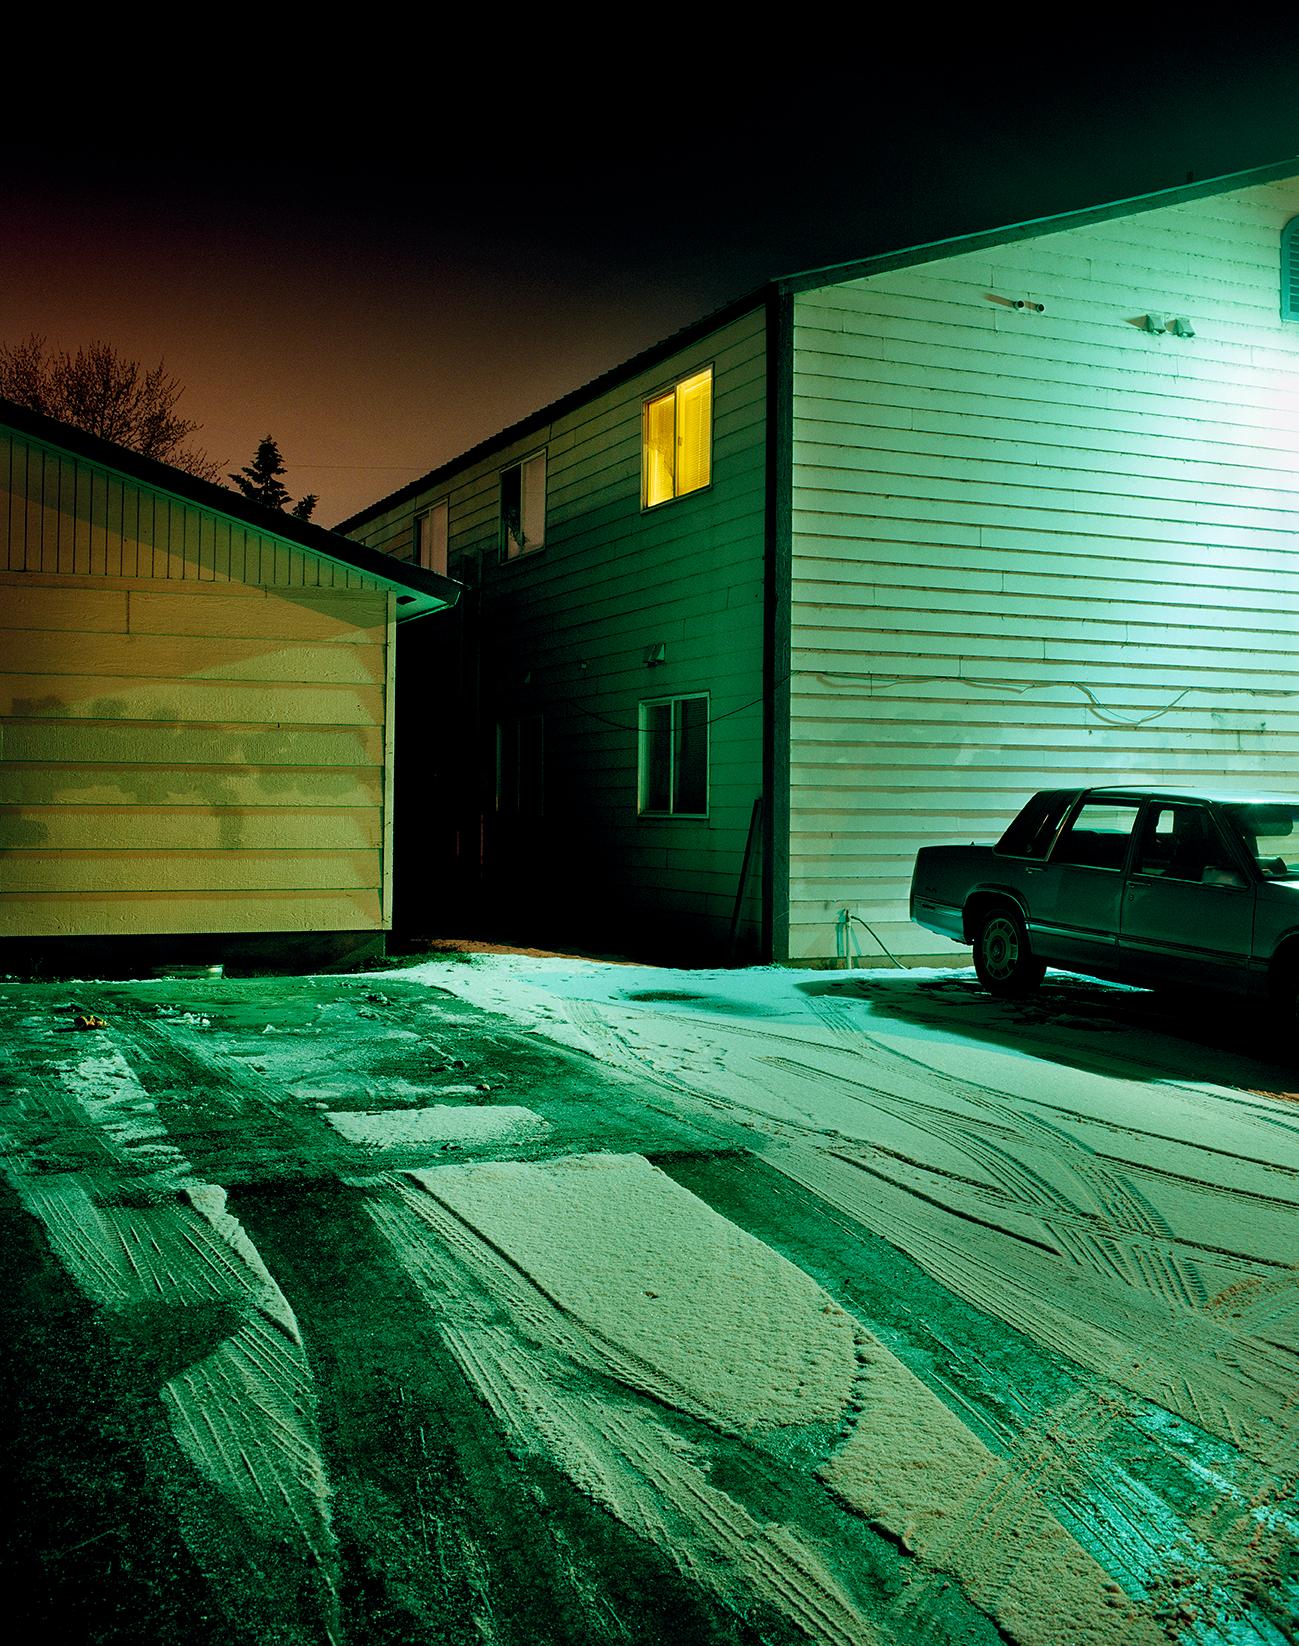 #7373 - Todd Hido (Colour Photography)
Signed, titled and dated on reverse
Archival pigment print

Available in three sizes:
24 x 20 inches, from an edition of 10 + 3 APs
38 x 30 inches, from an edition of 5 + 2 APs
48 x 38 inches, from an edition